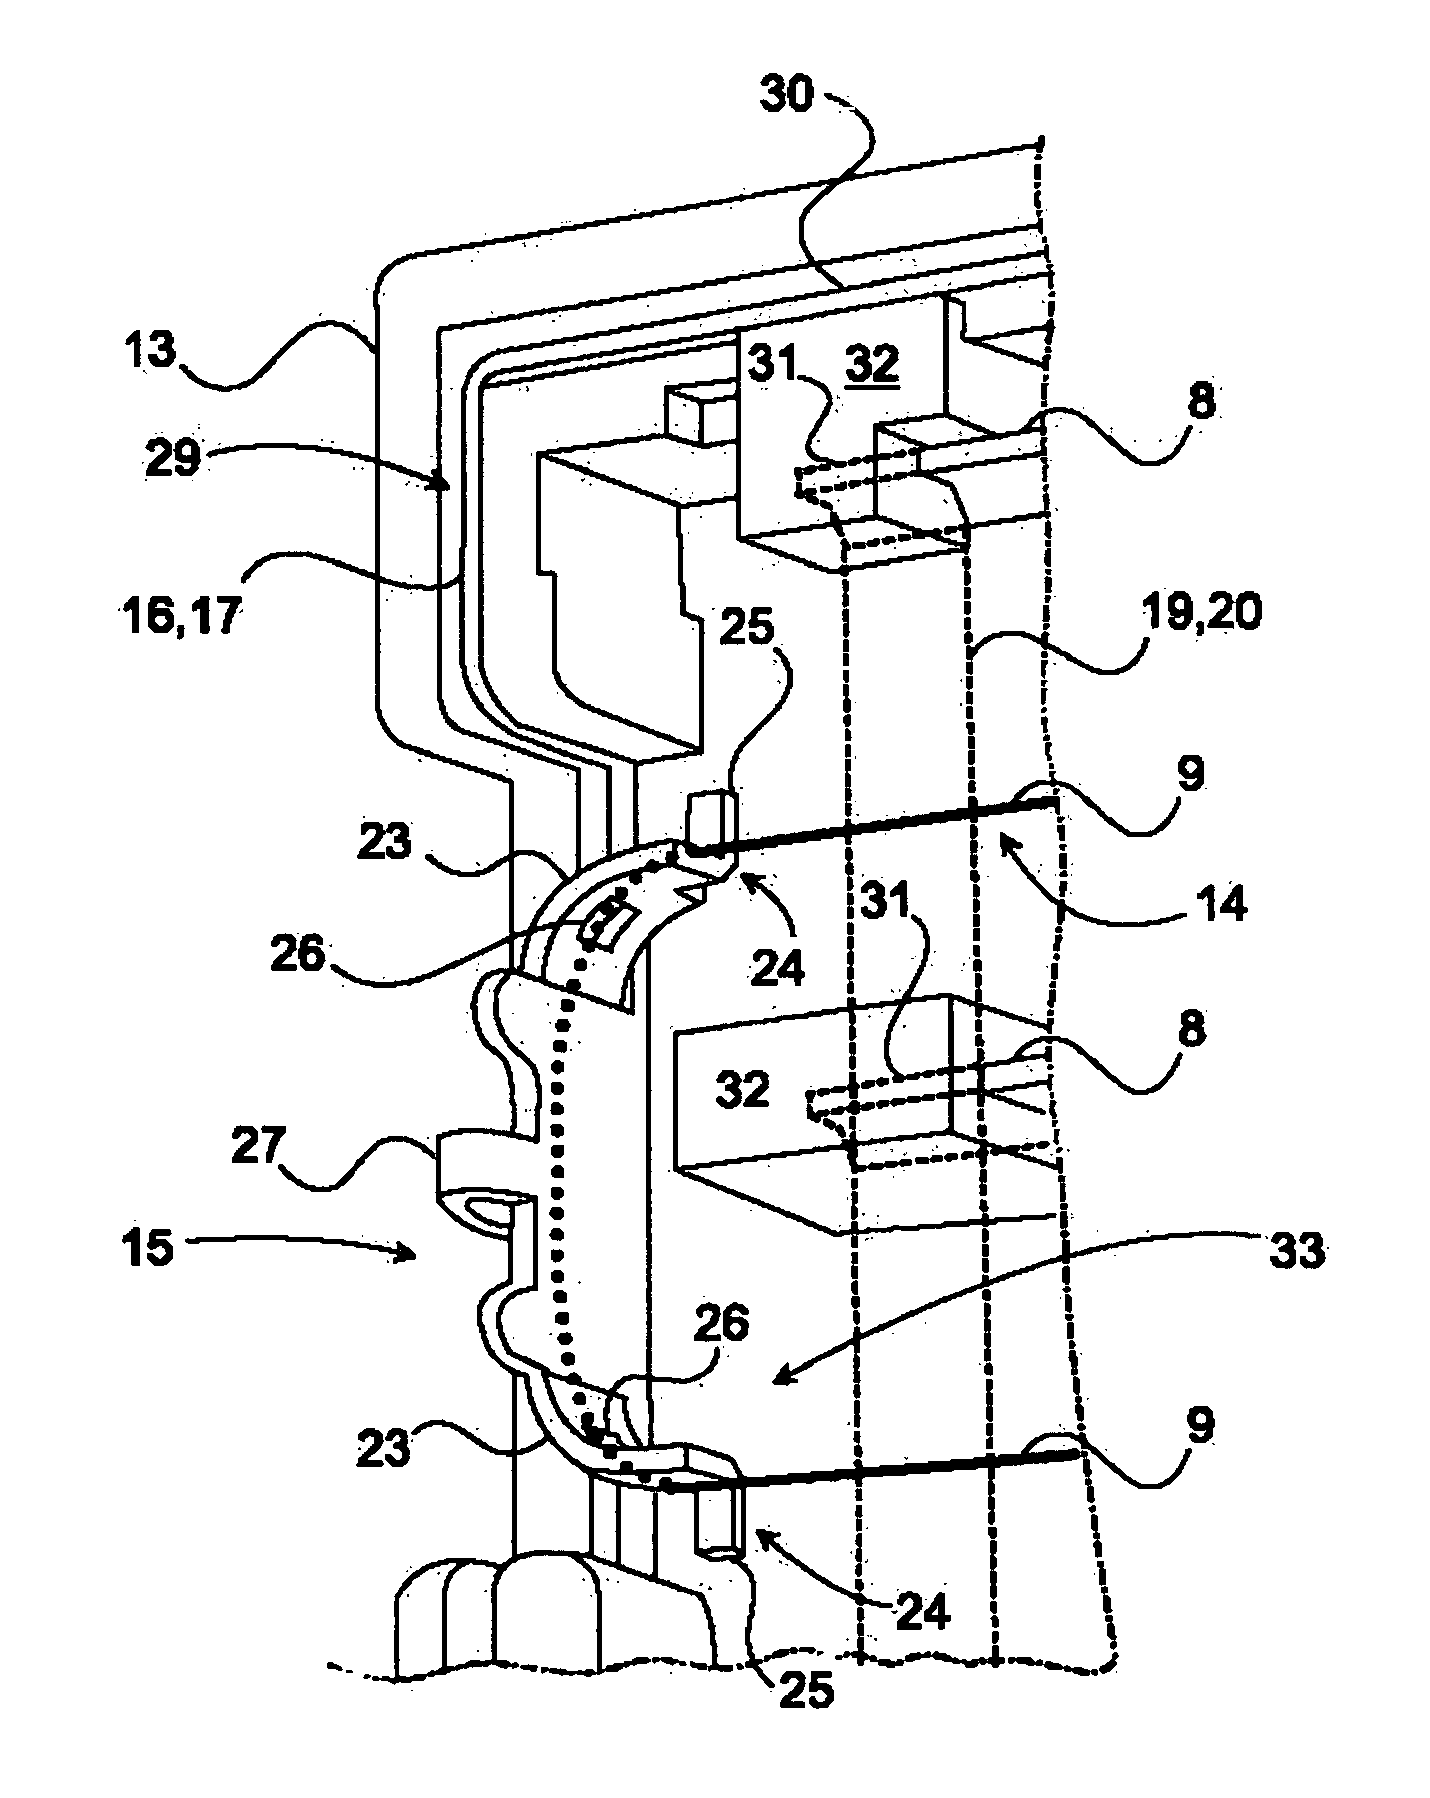 Device for ionizing particles carried in an airflow, for ventilation, heating, and/or air-conditioning system in particular